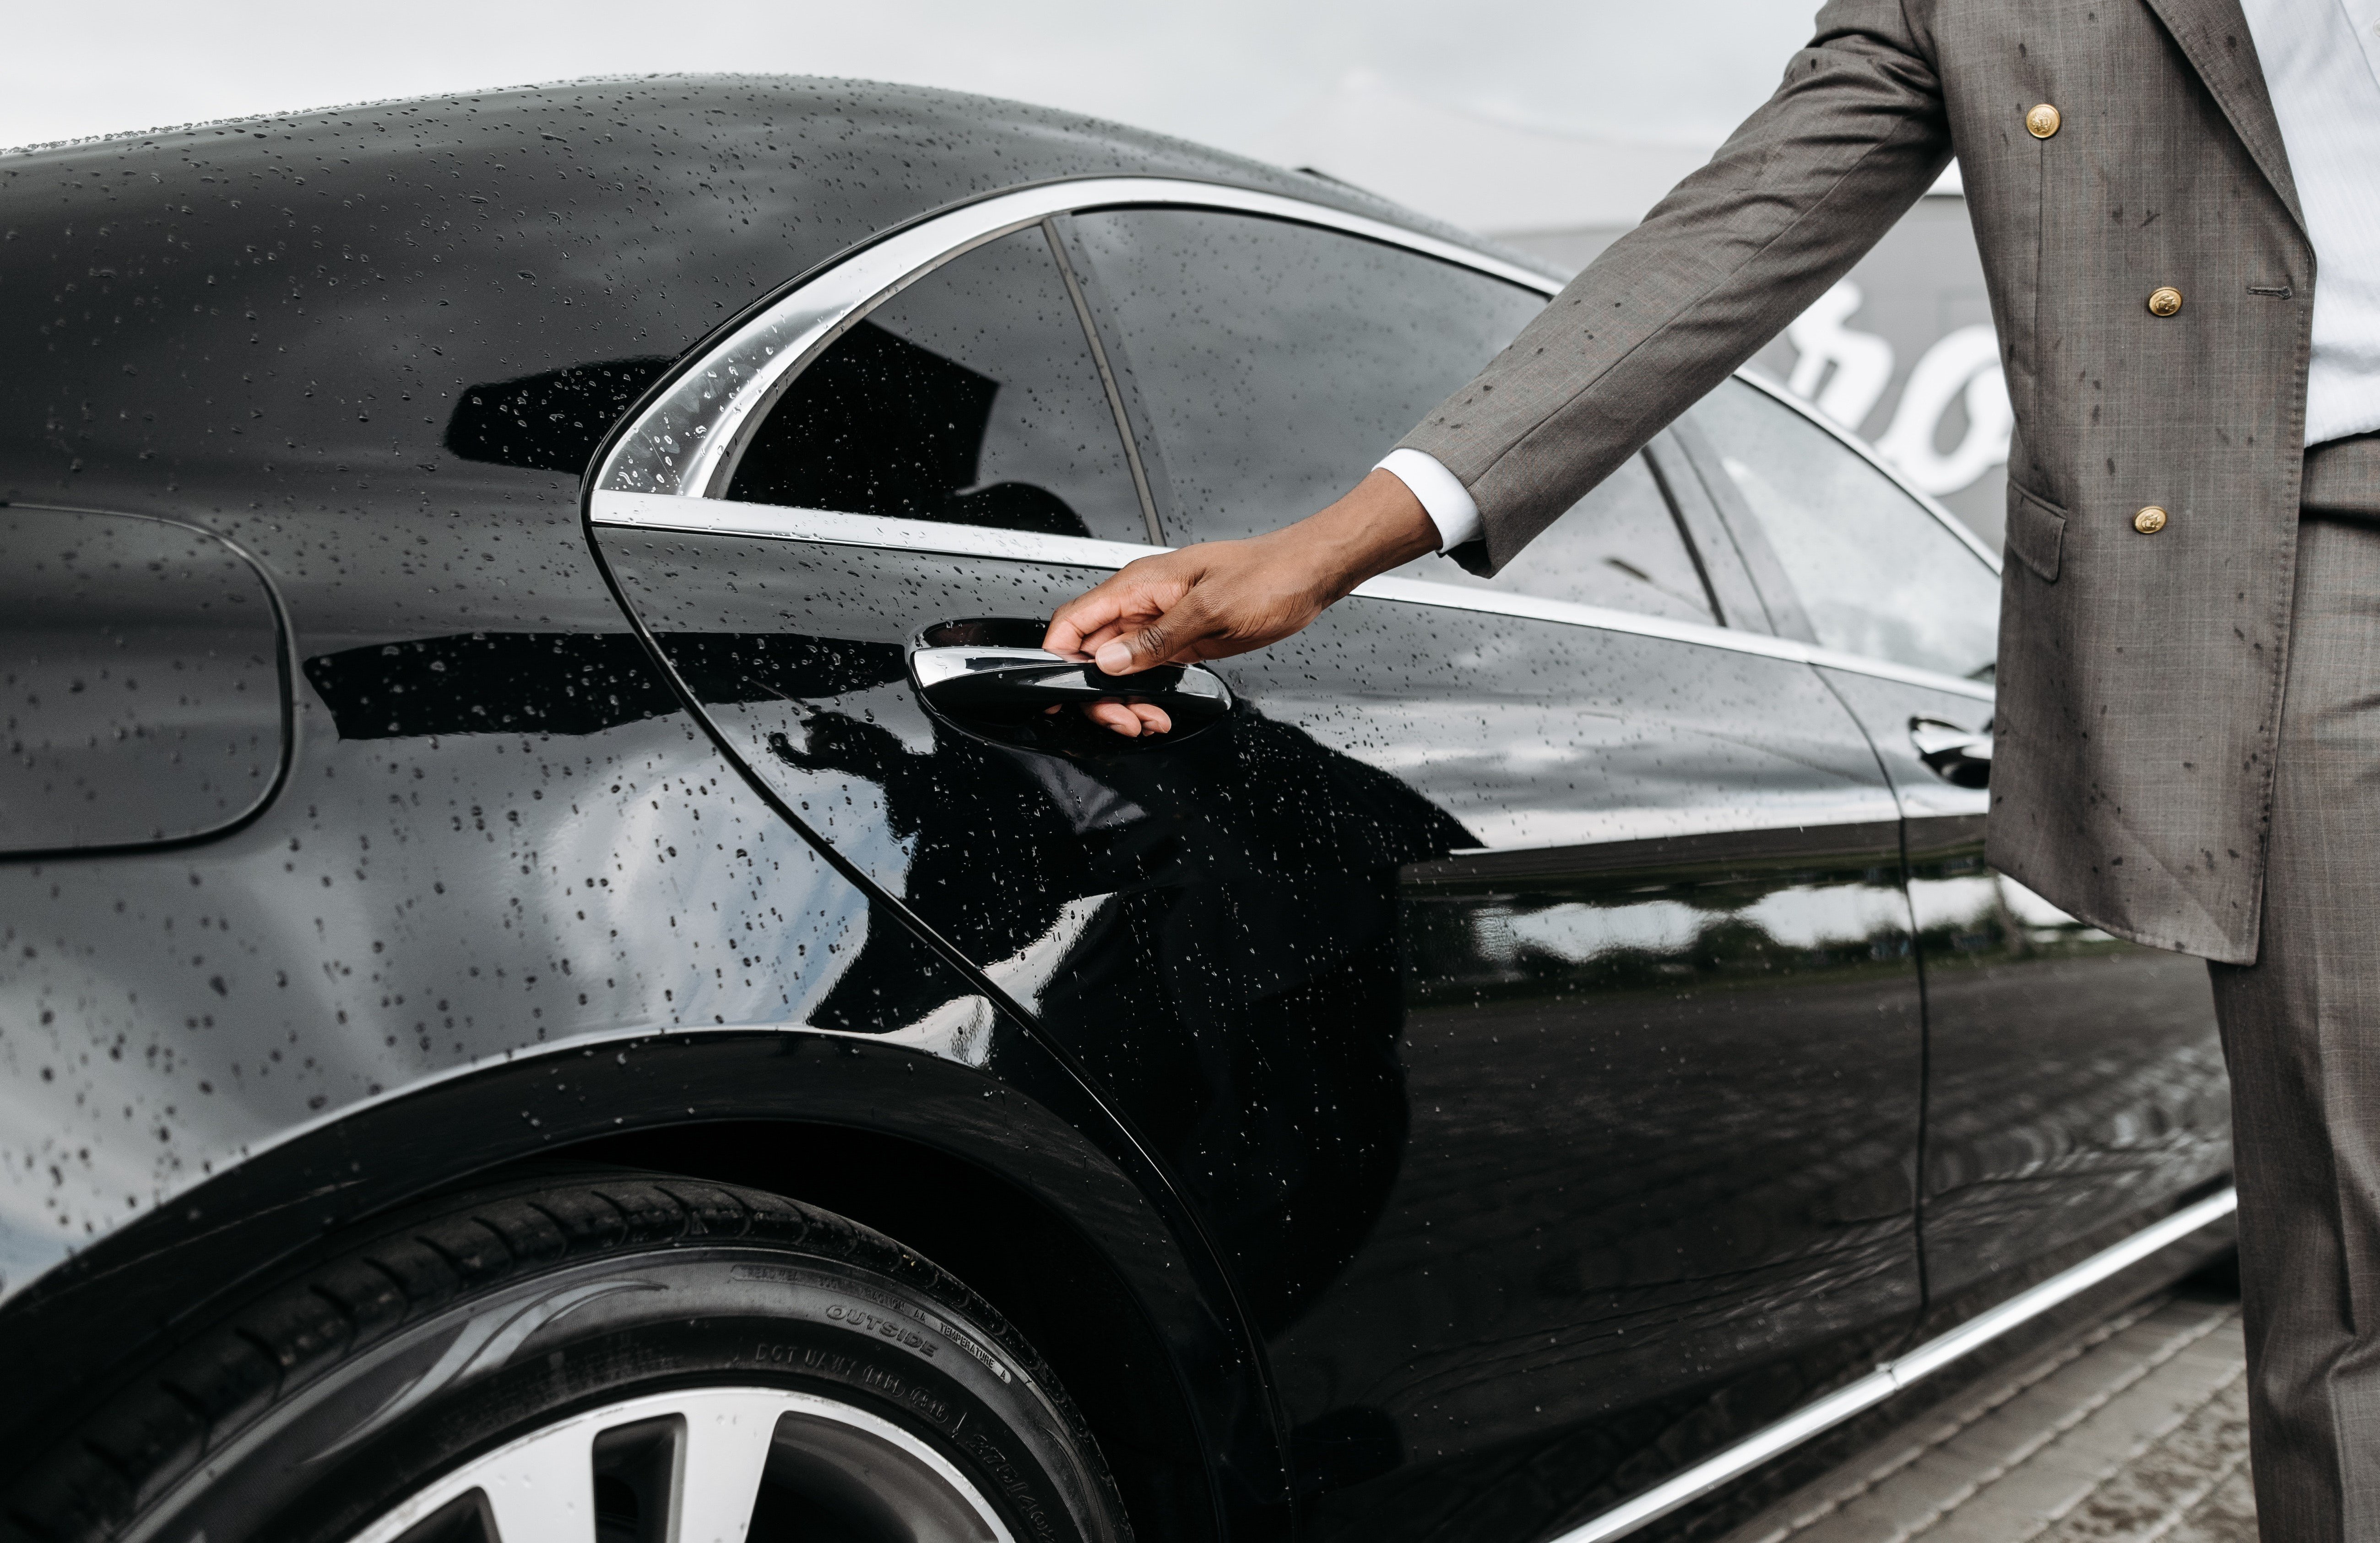 The man insisted that OP get into his car. | Source: Pexels